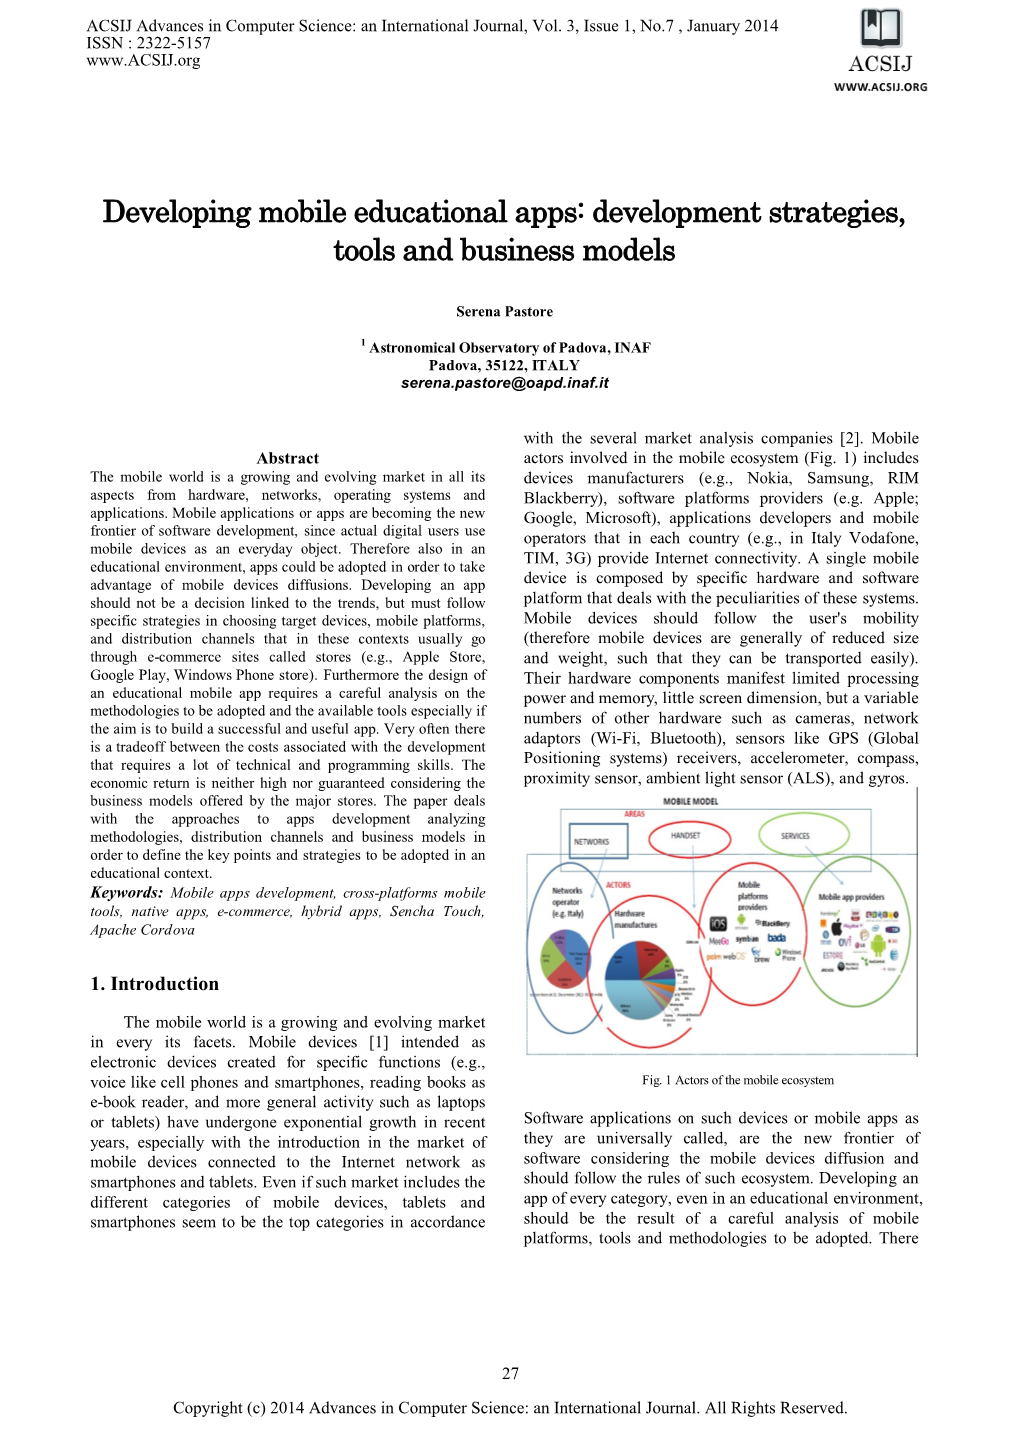 Developing Mobile Educational Apps: Development Strategies, Tools and Business Models